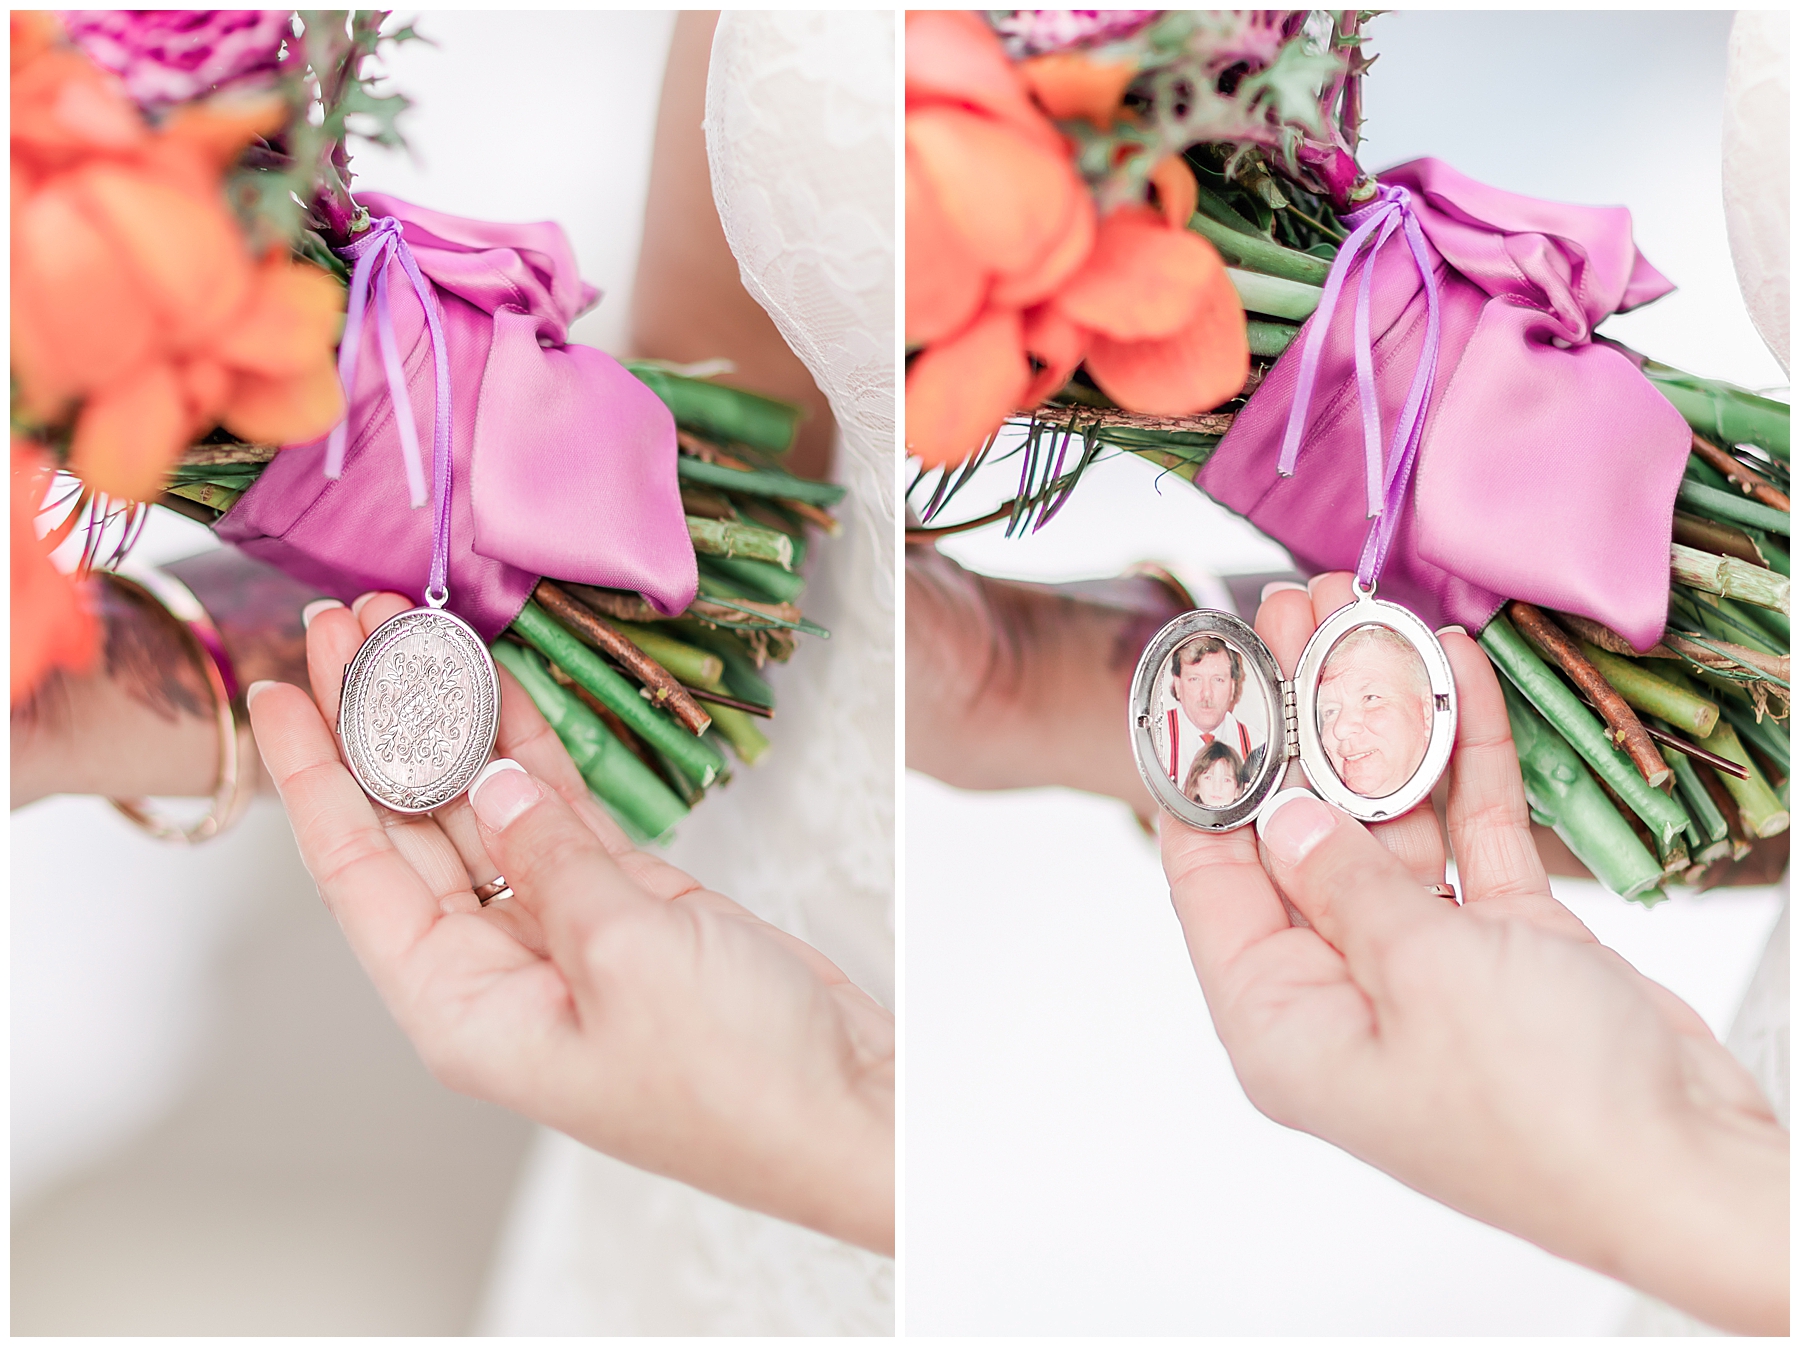 Father's photos in locket for bride's heirloom wedding details.